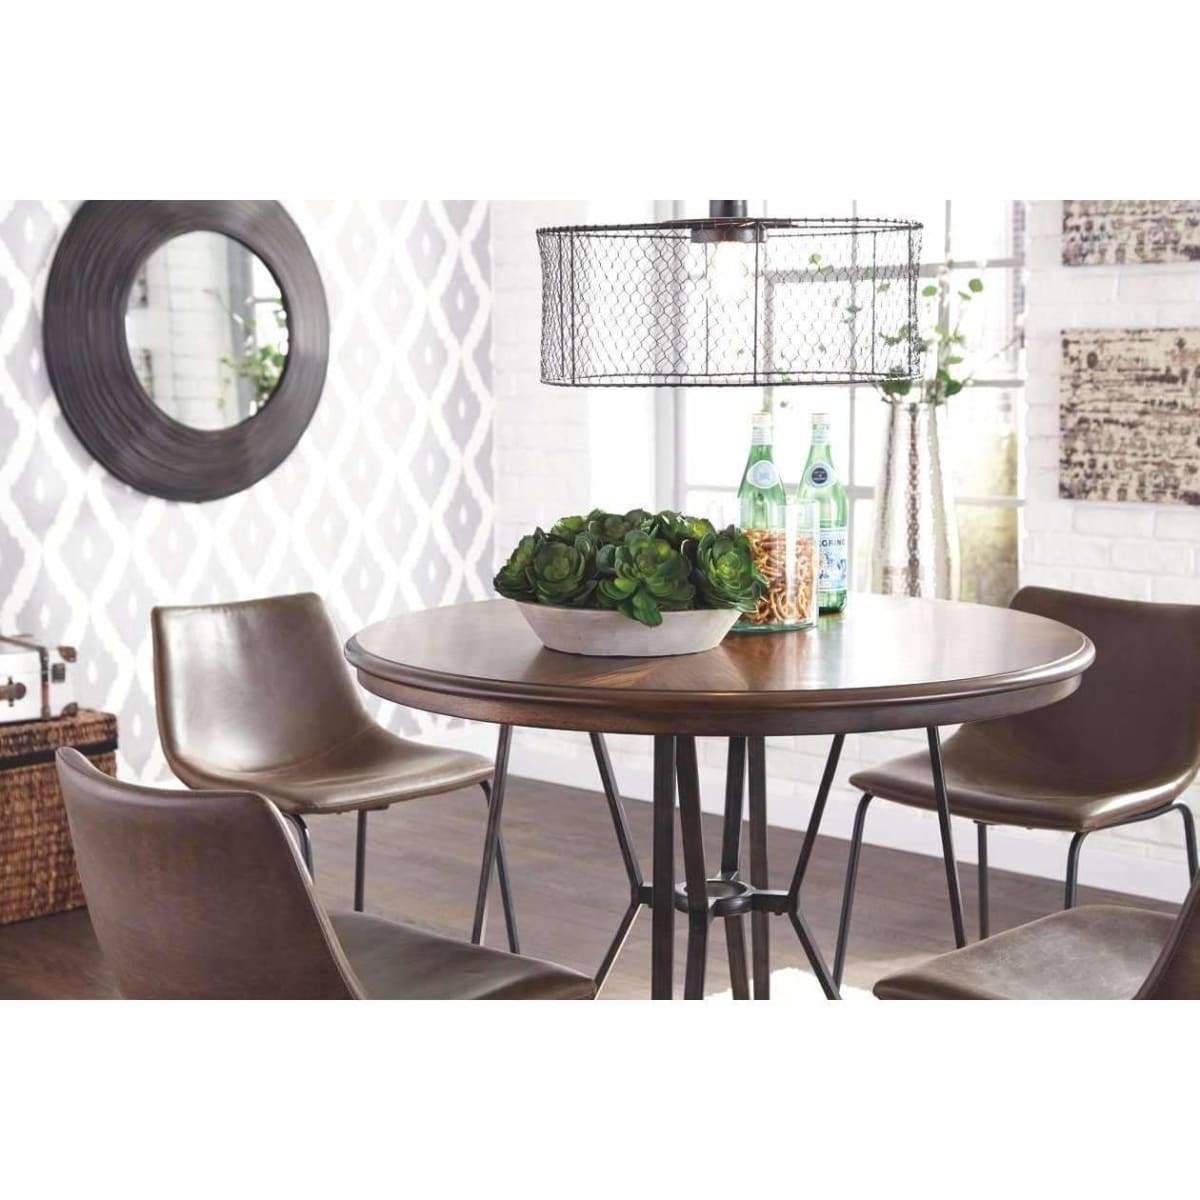 Centiar Counter Height Dining Room Table With 4 Stools - DININGCOUNTERHEIGHT